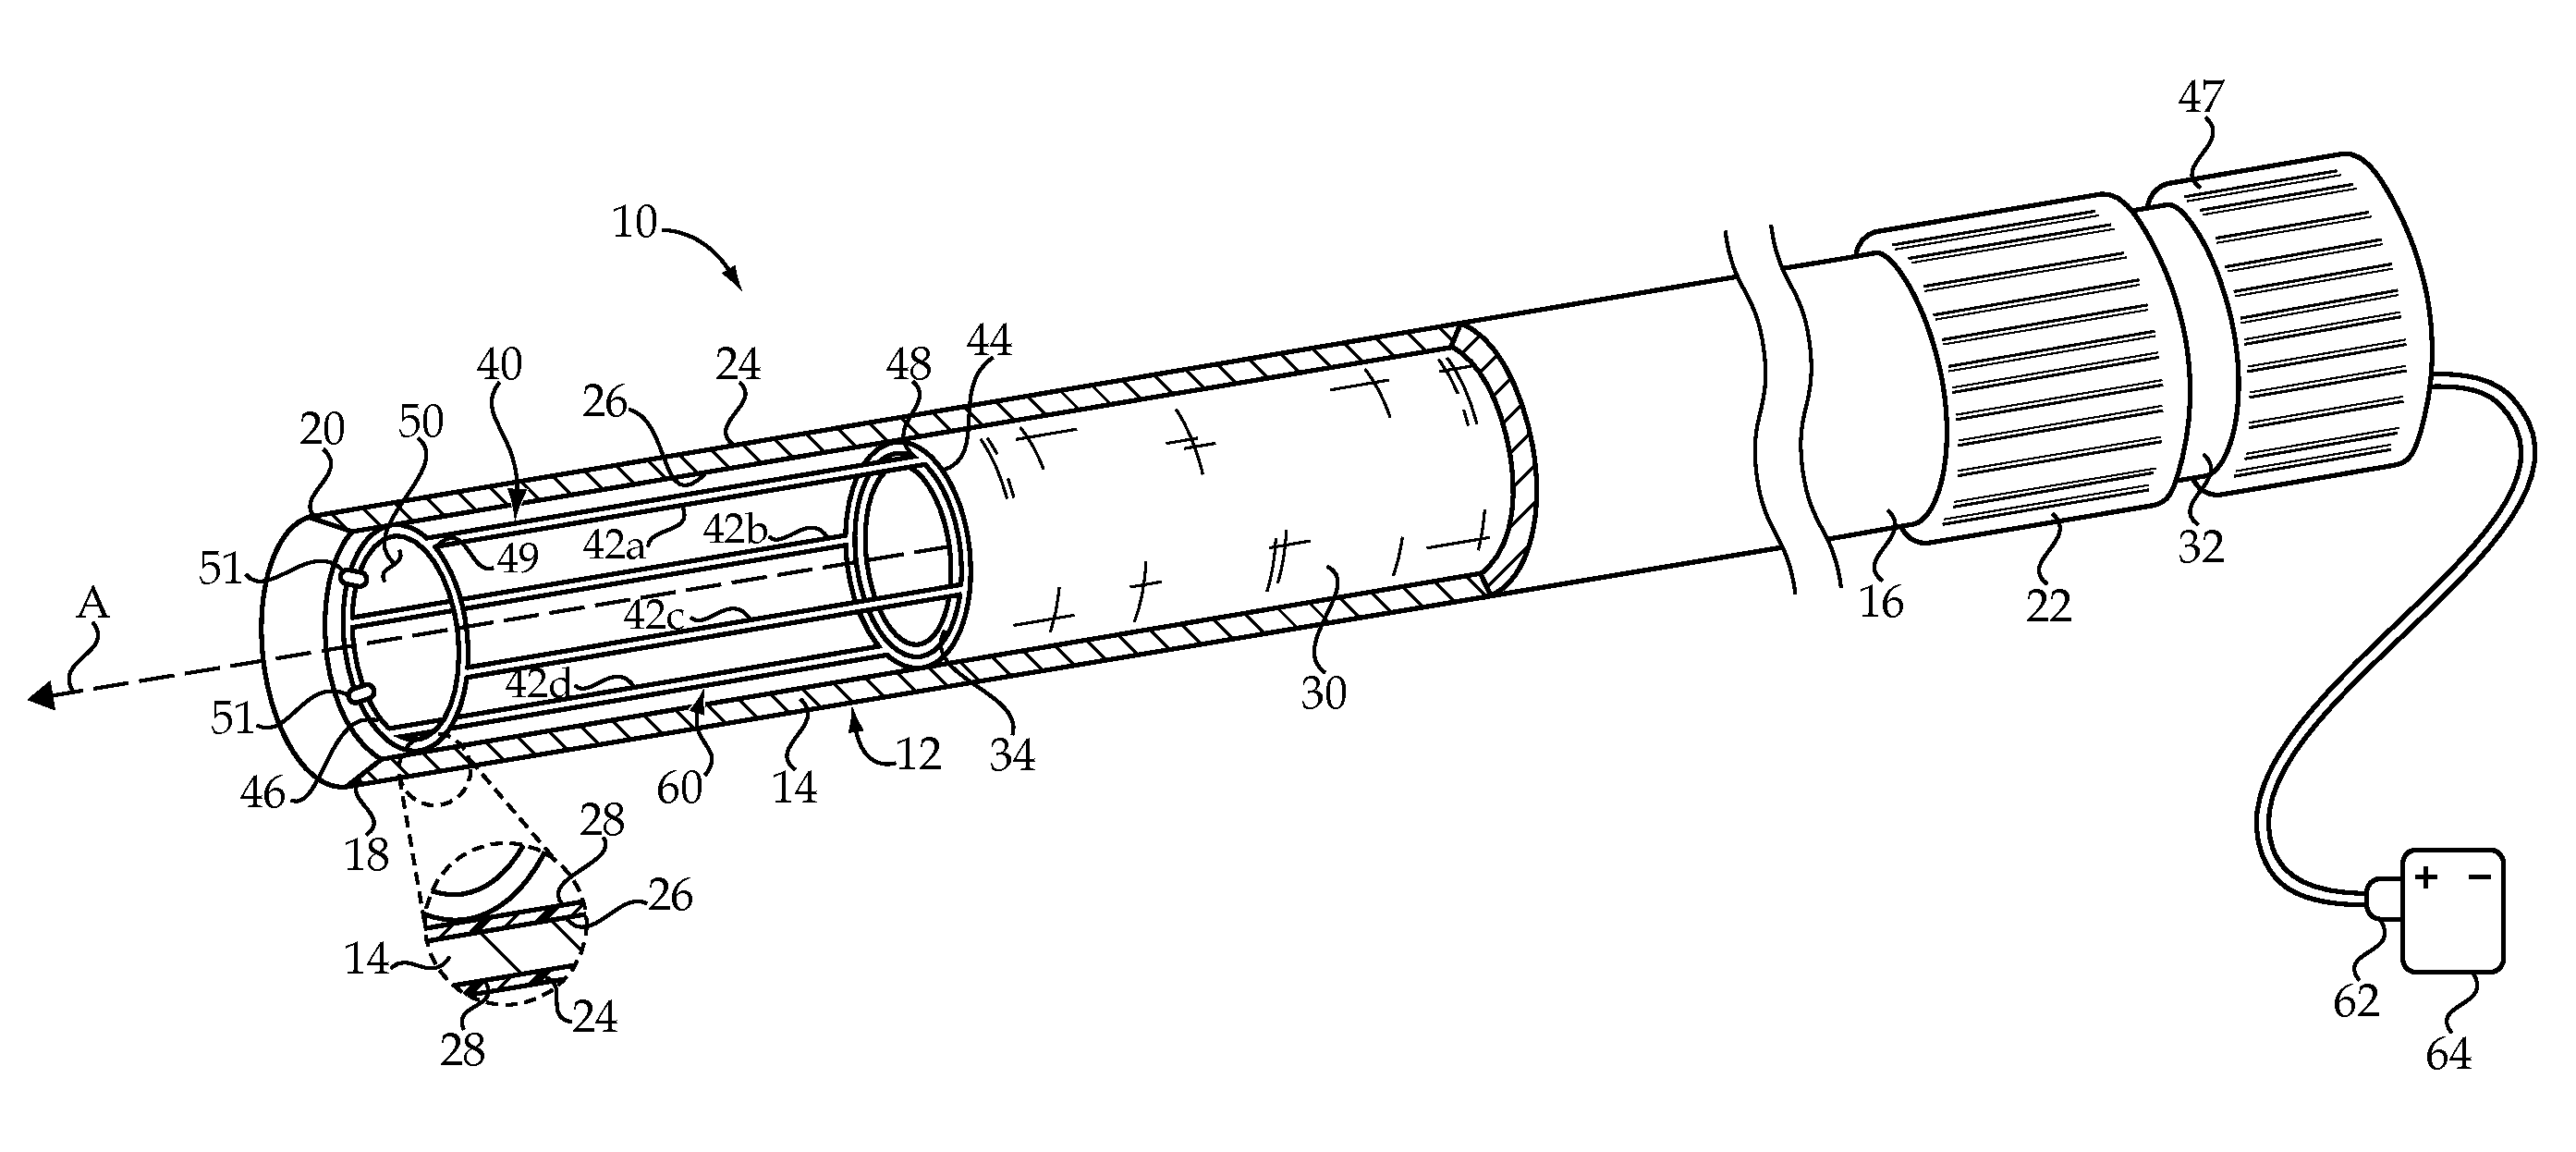 Tissue Sampling Device And Method